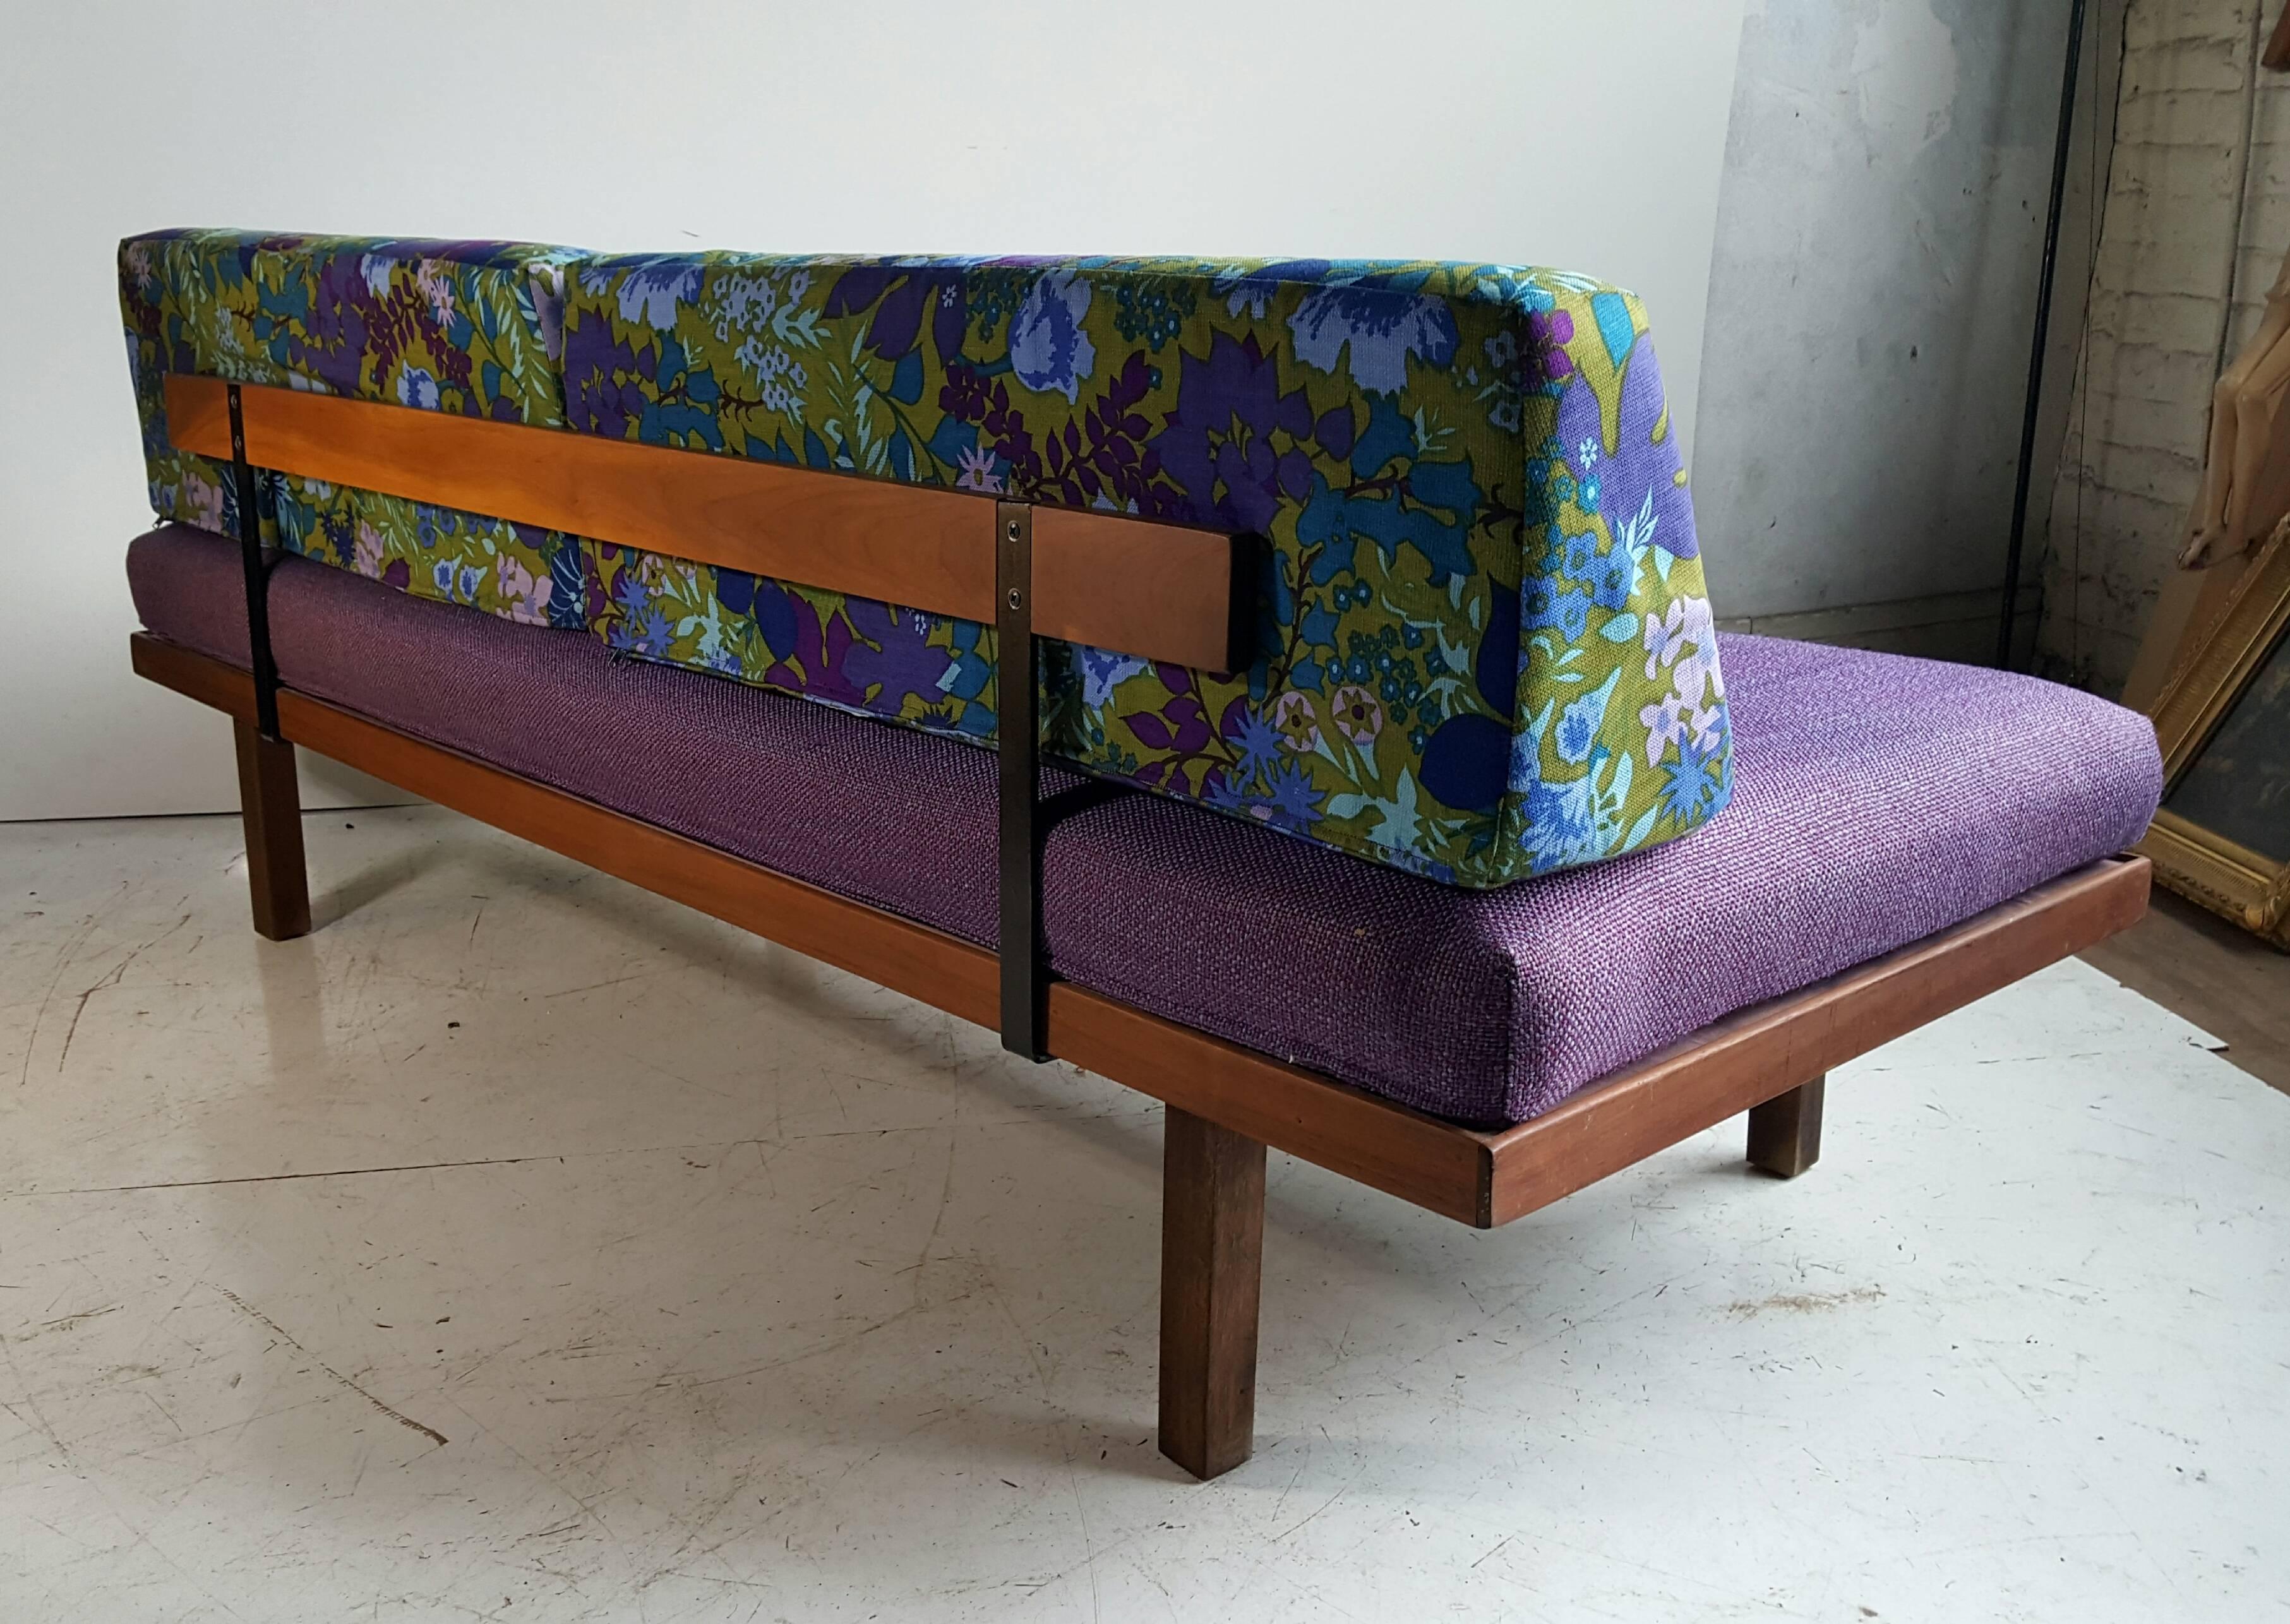 20th Century Mid-Century Modern Daybed/Sofa, George Nelson Inspired